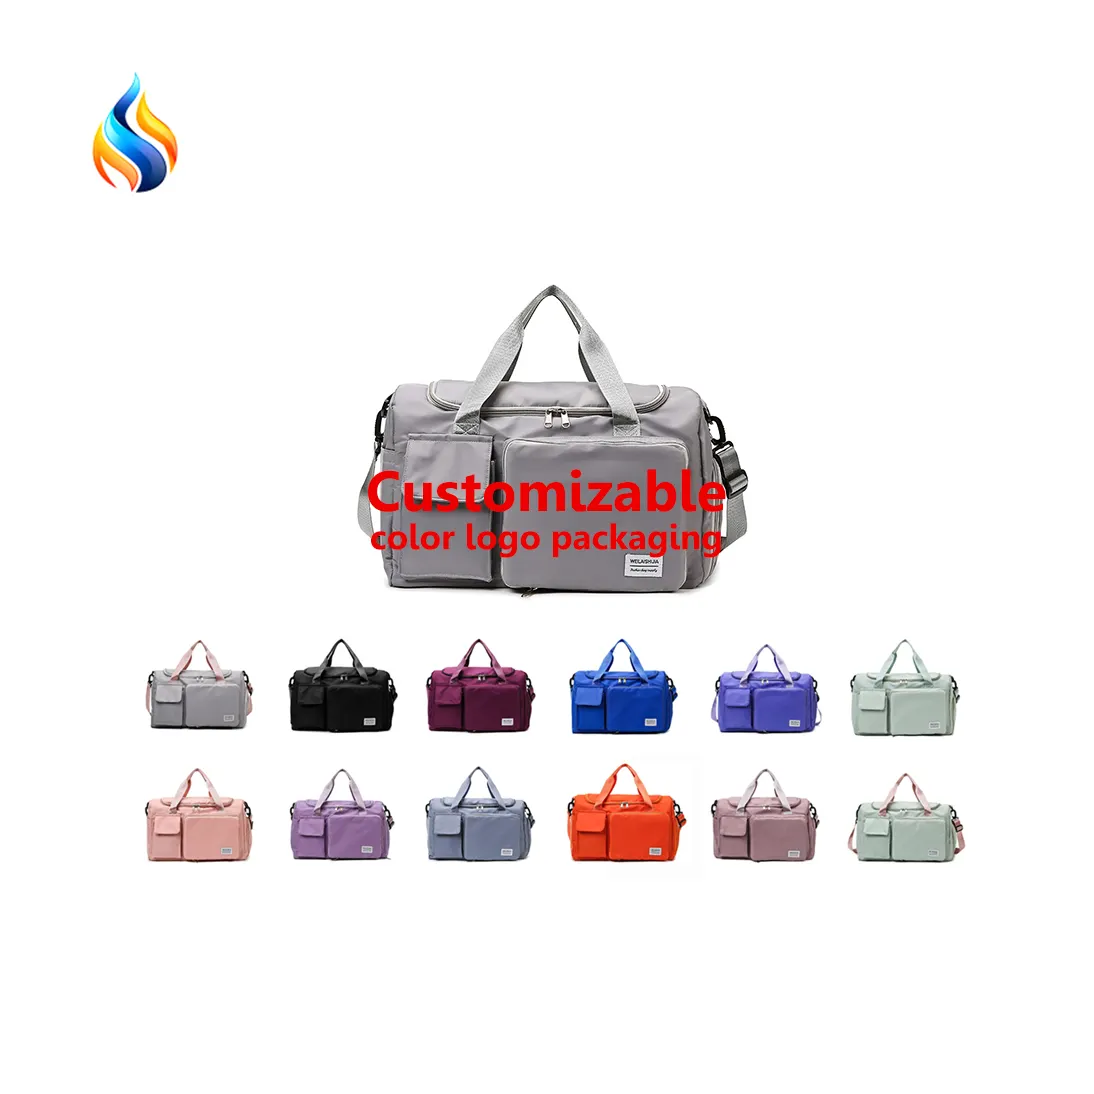 ZY customized logo Wholesale Large Capacity Sport Travel Bags Compartment Fashion Travel Tote Trip Bag